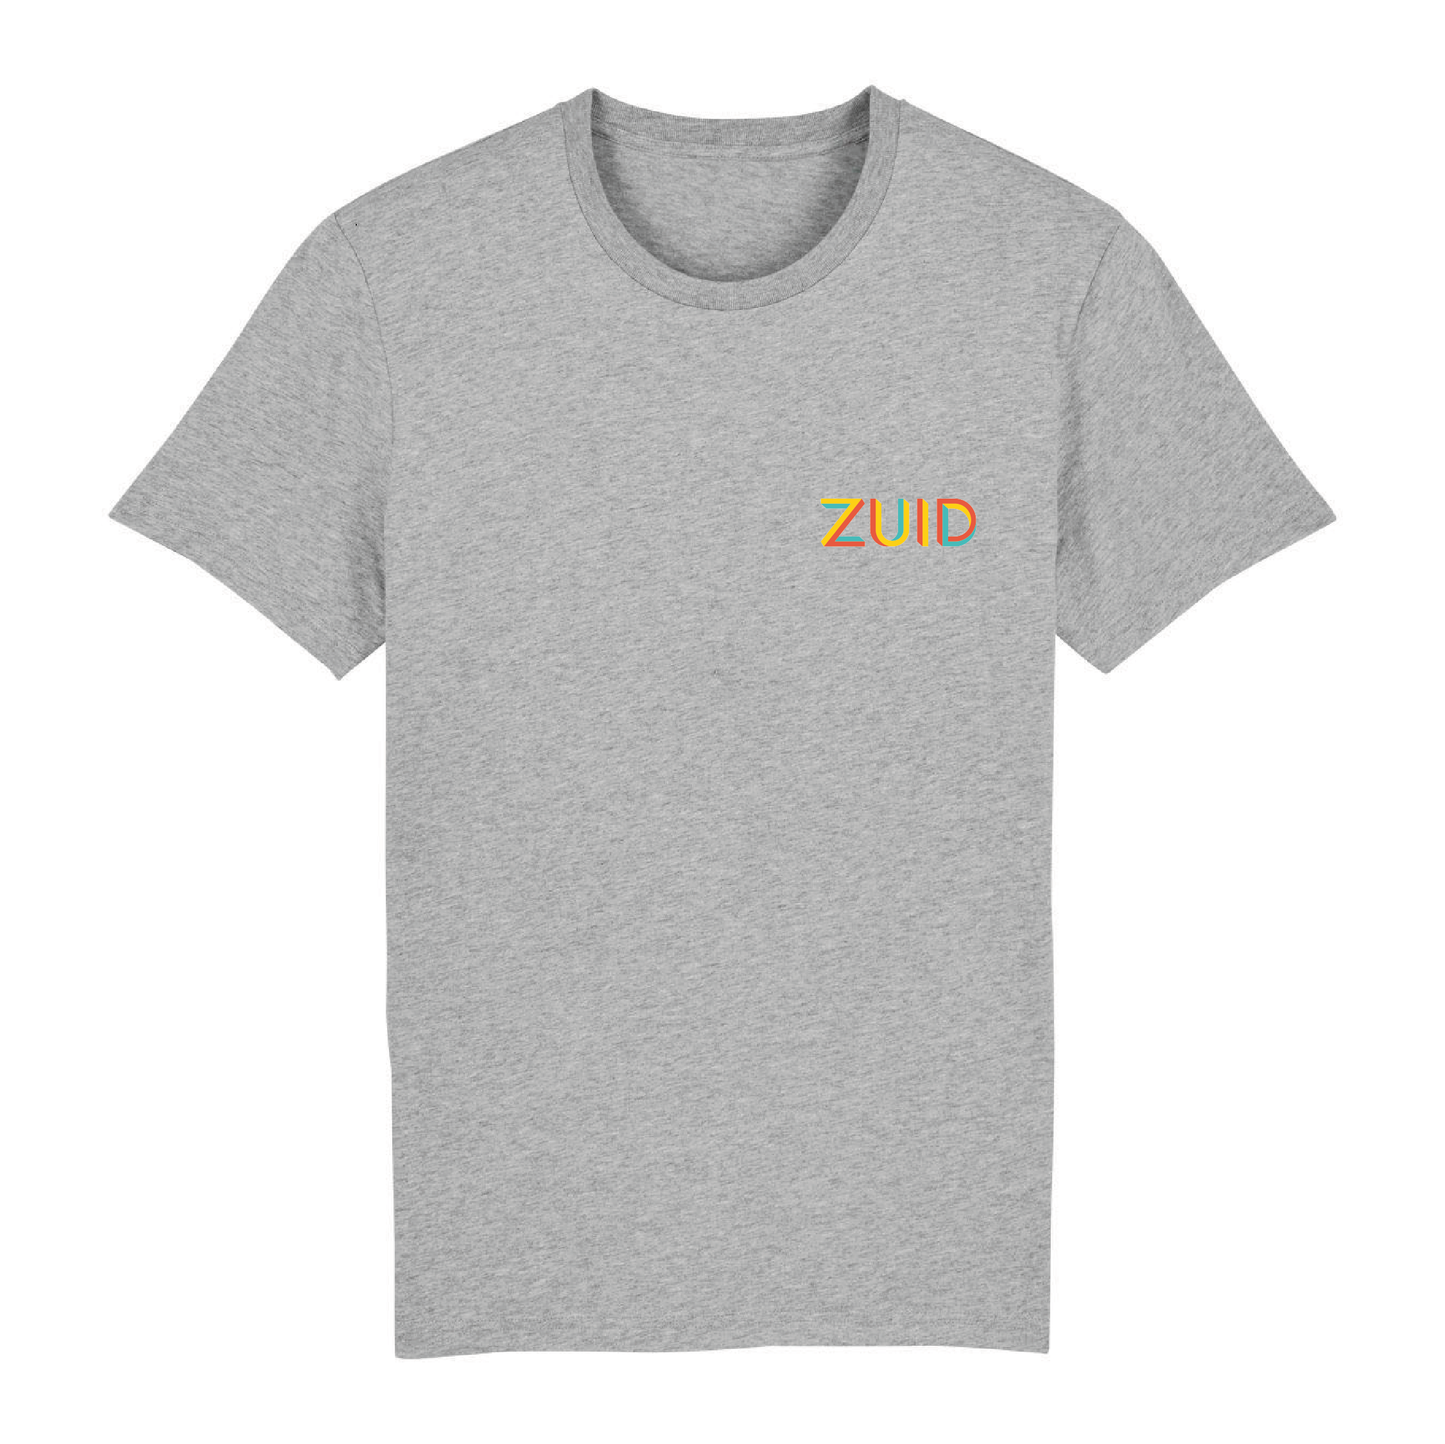 Zuid Color T-shirt Heather Grey